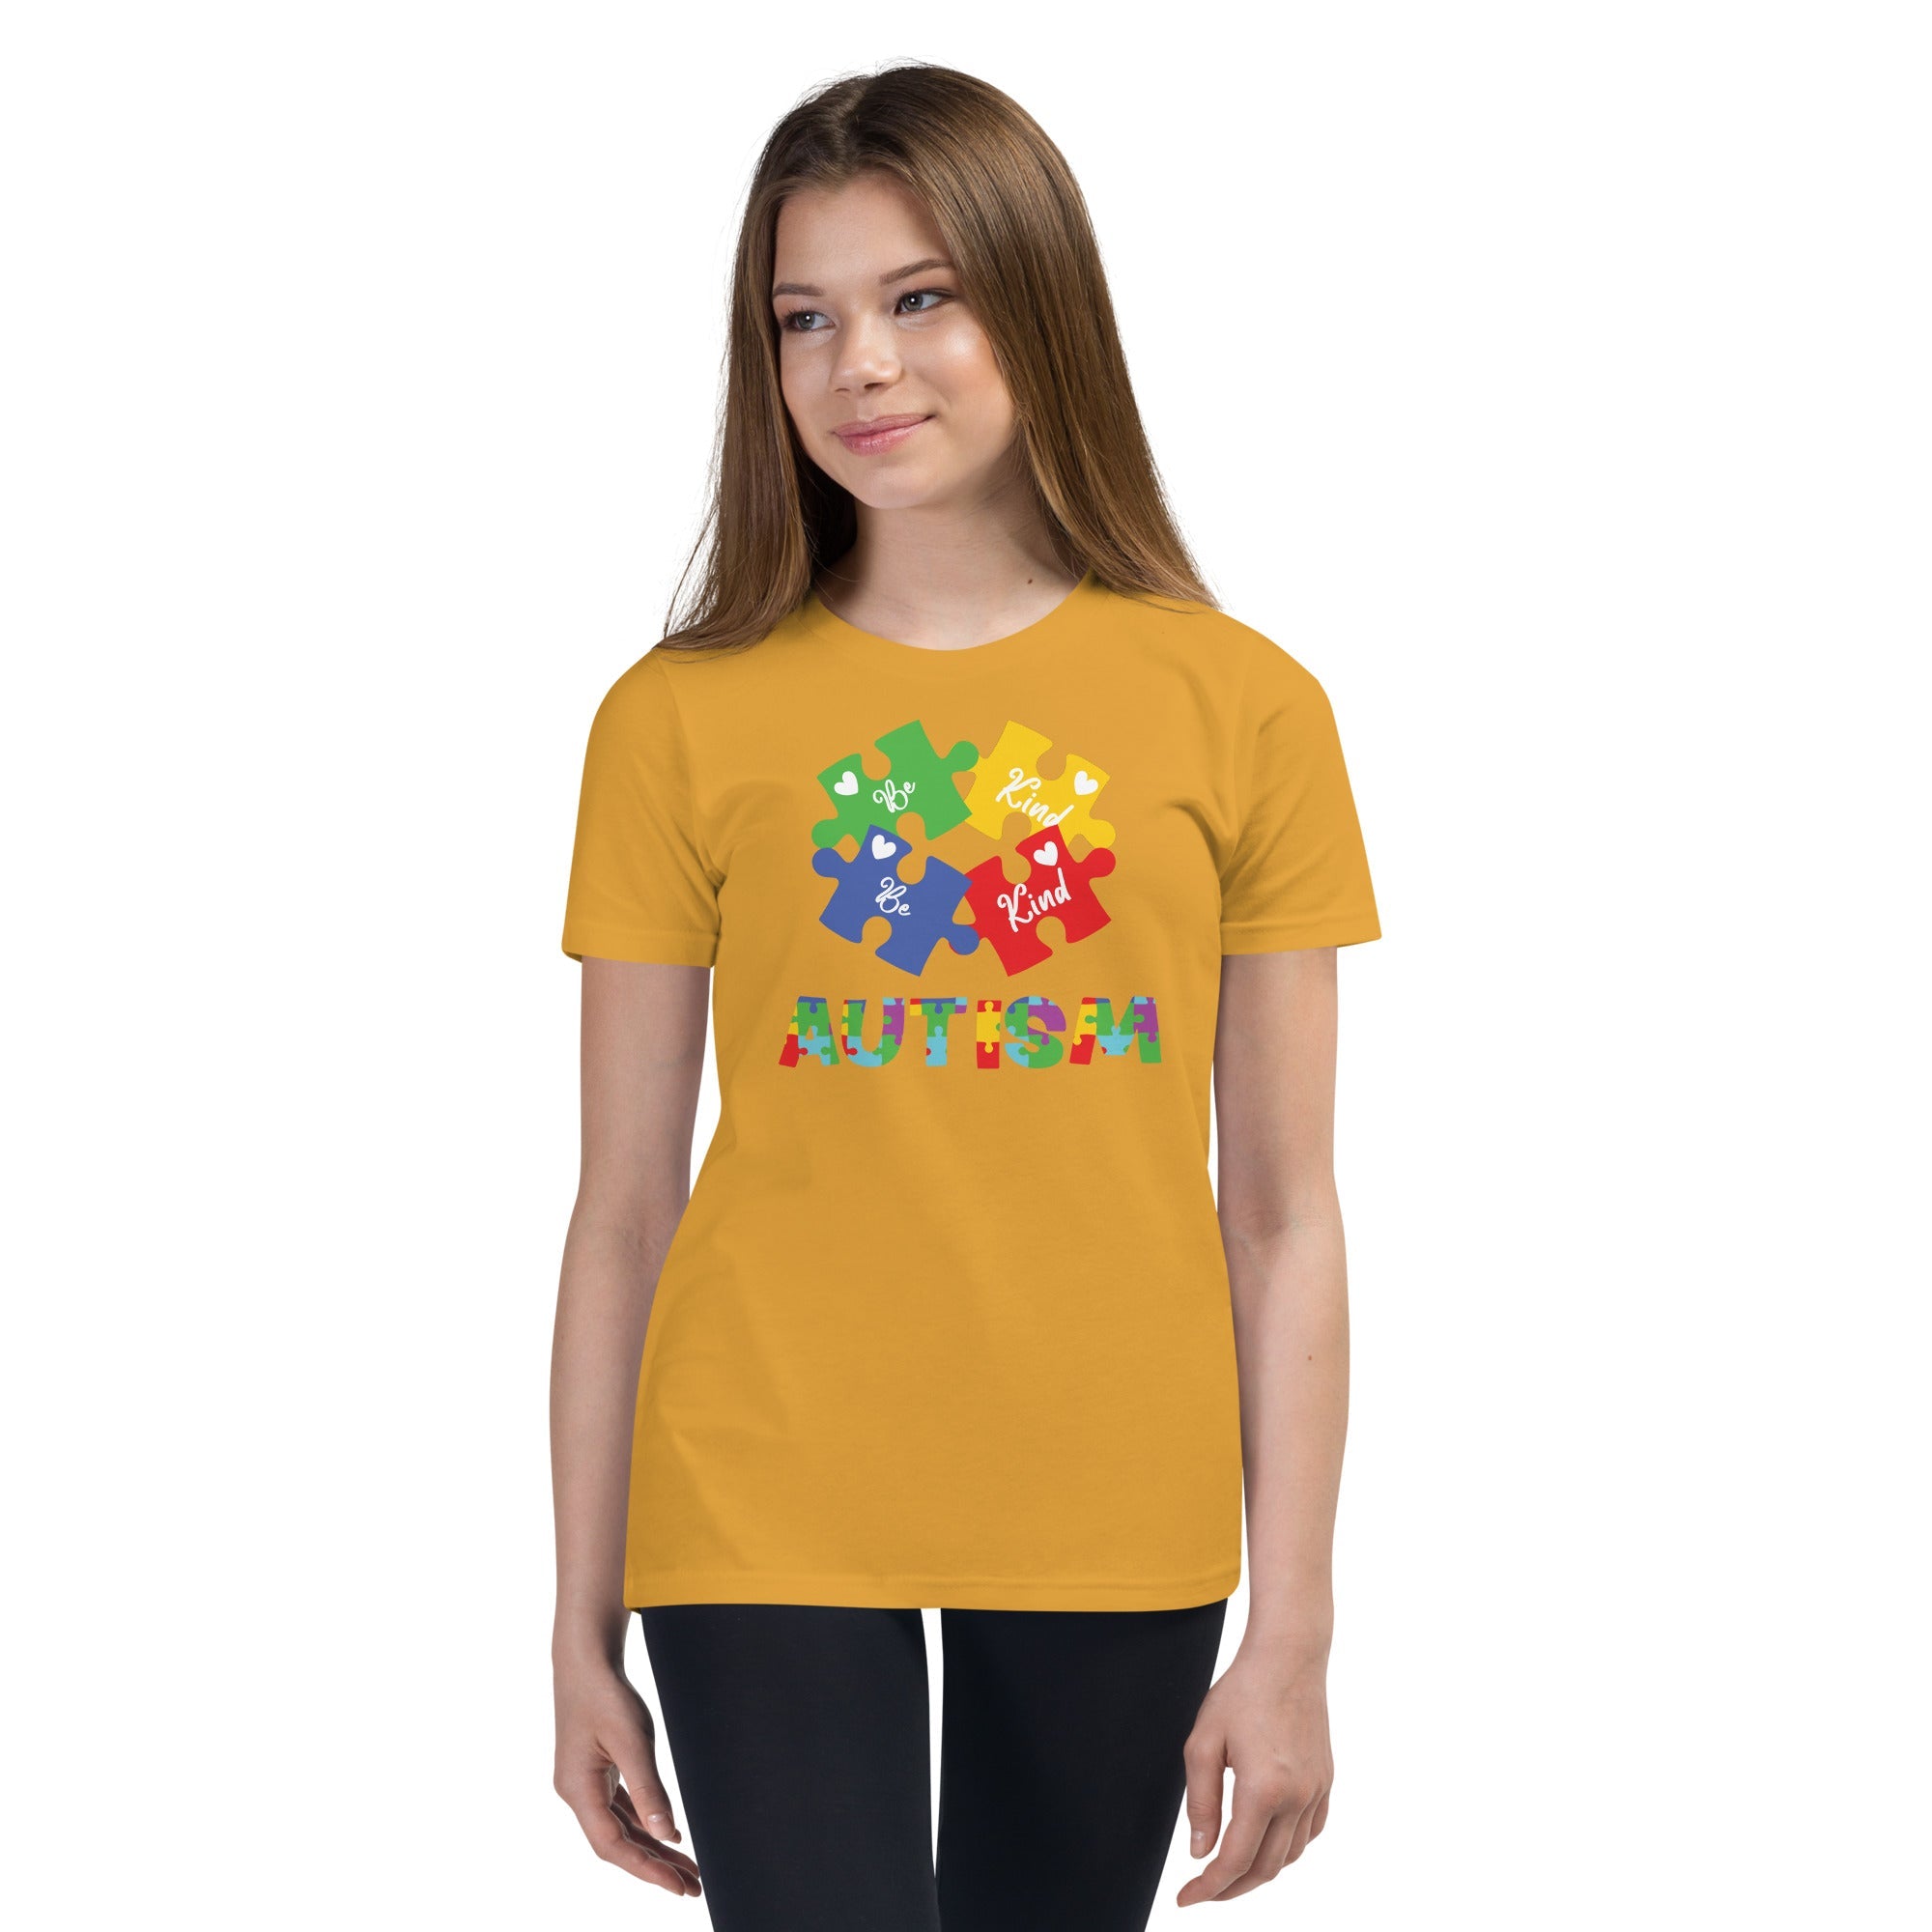 Autism Be Kind Youth Graphic Tees - Kicks Shoelaces